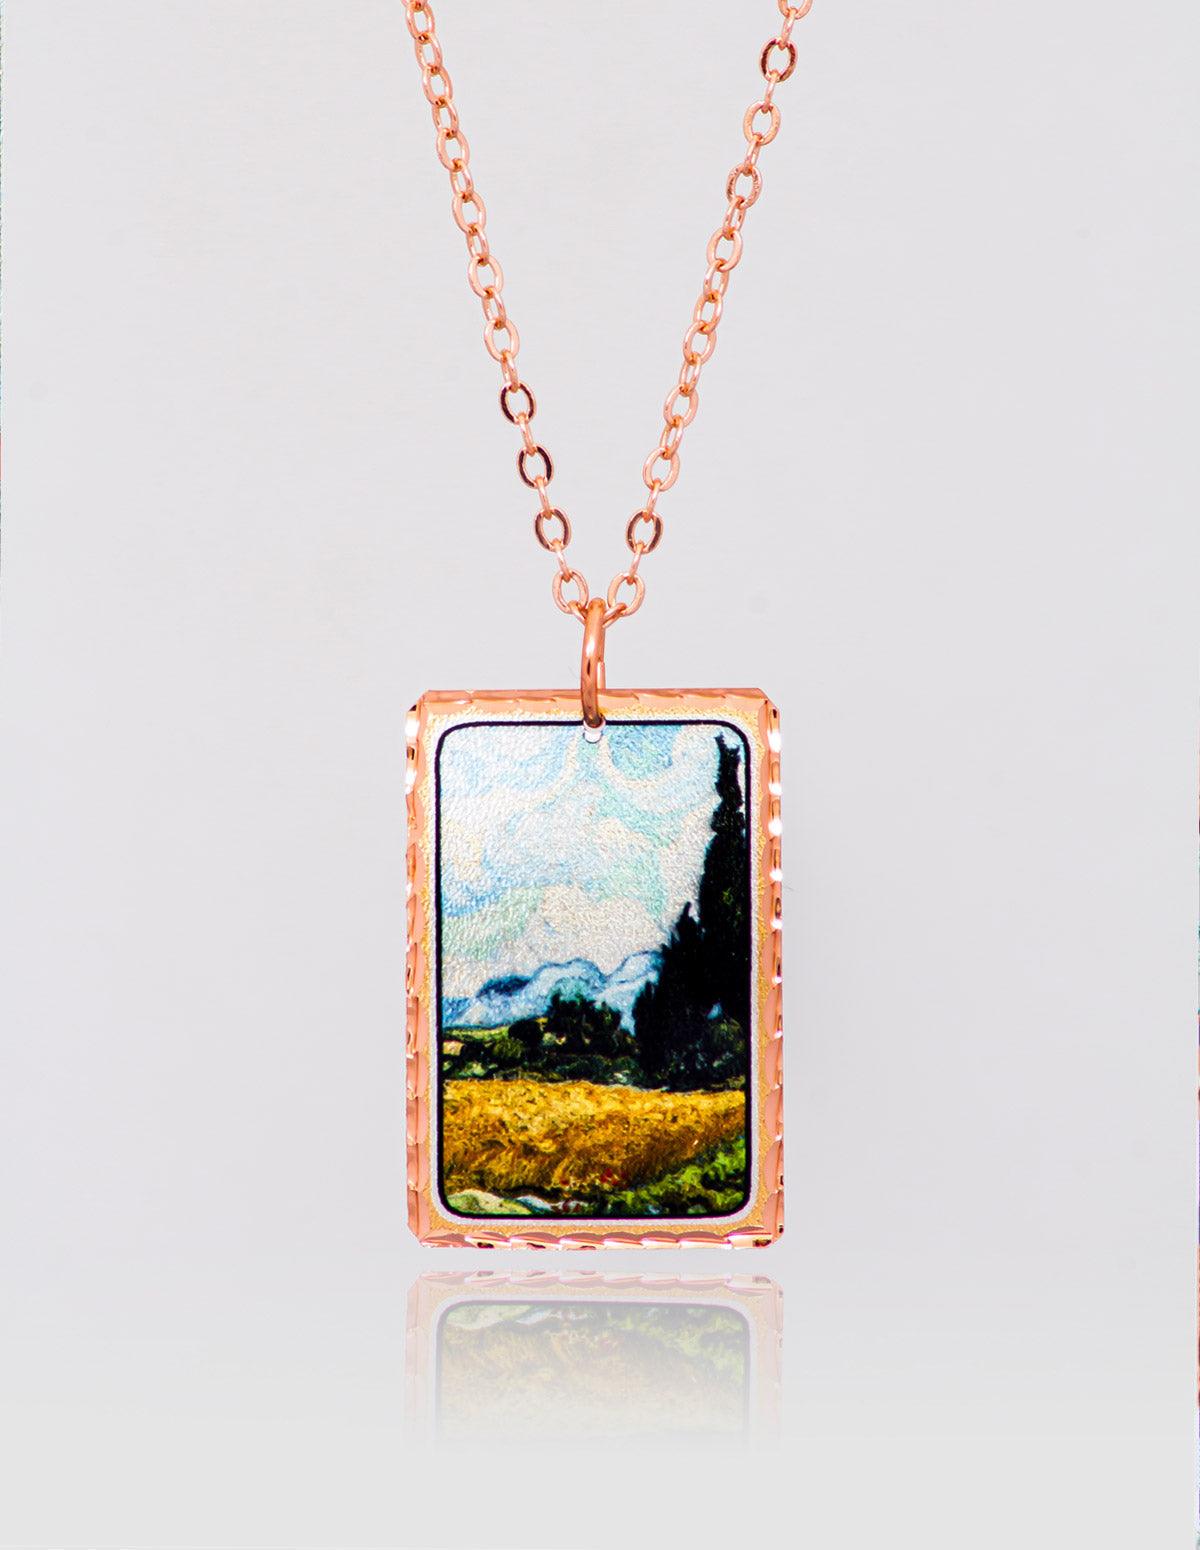 Vincent Van Gogh Wheat Field with Cypresses Necklace - artucky-US - Cypresses, import_2022_07_19_113509, kolye, tasarım kolye, van gogh, van gogh kolye, vincent van gogh, wheatfield